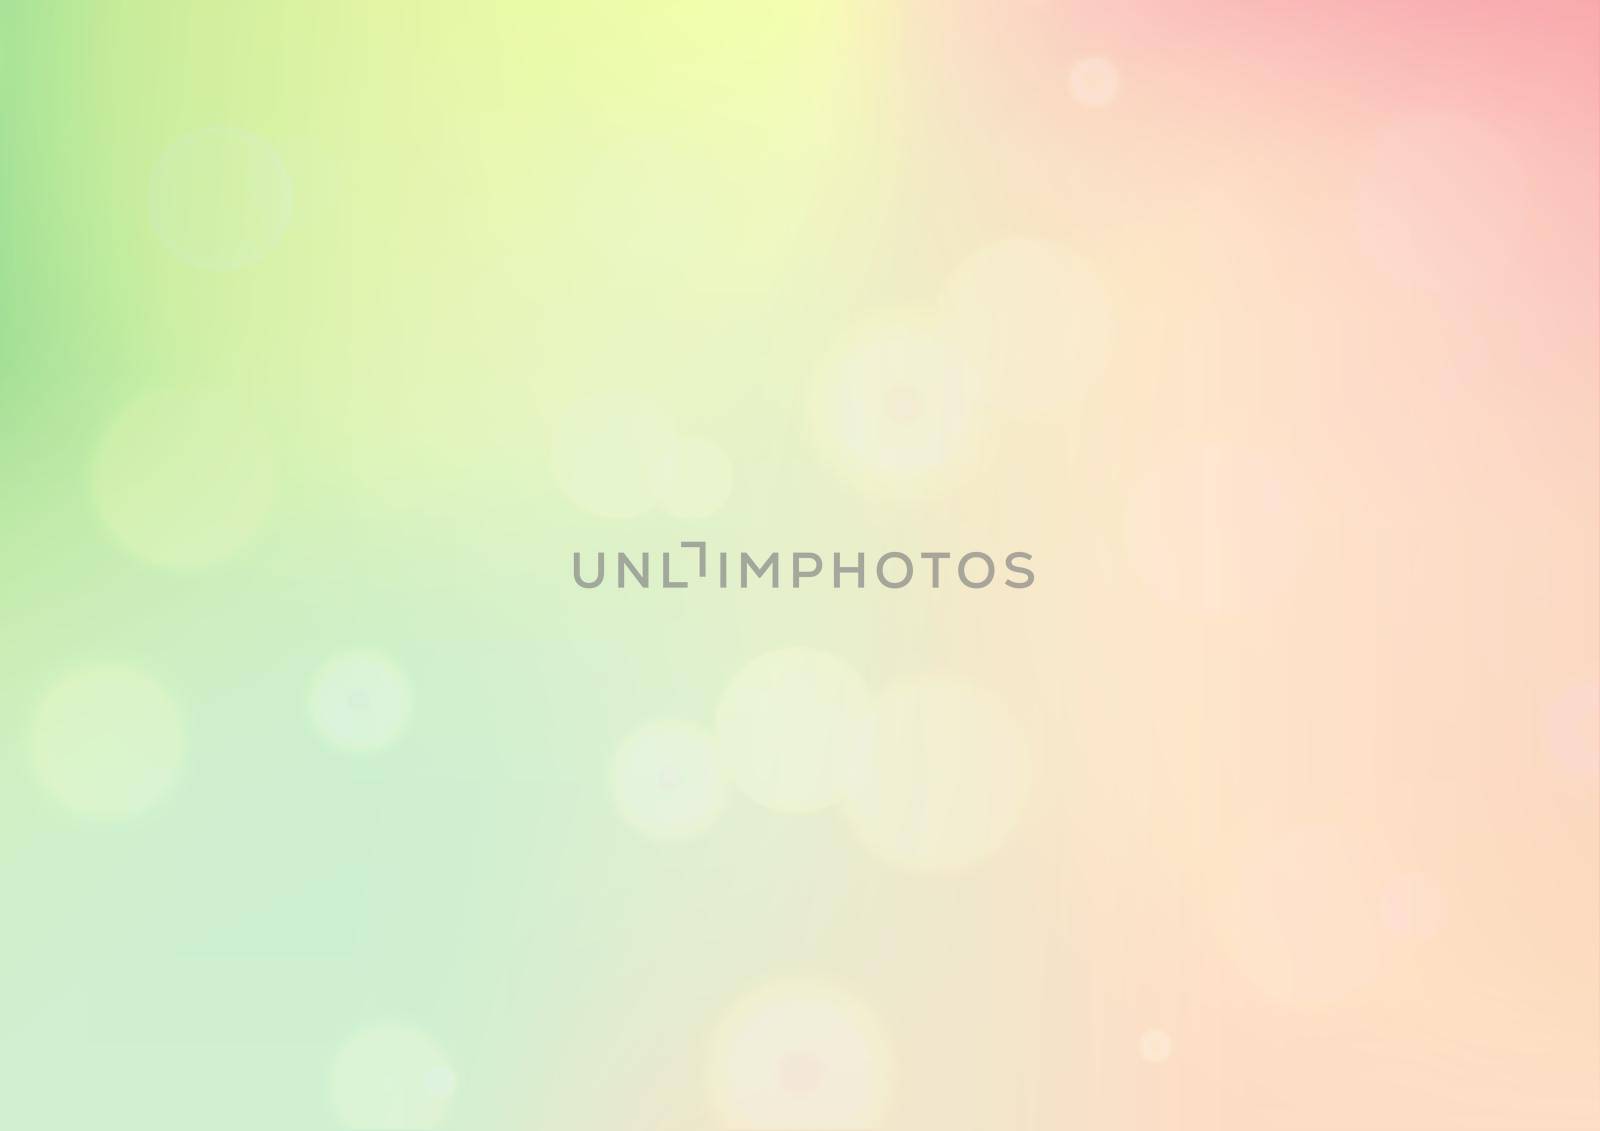 soft light colorful abstract background illustration design by Artphoto13